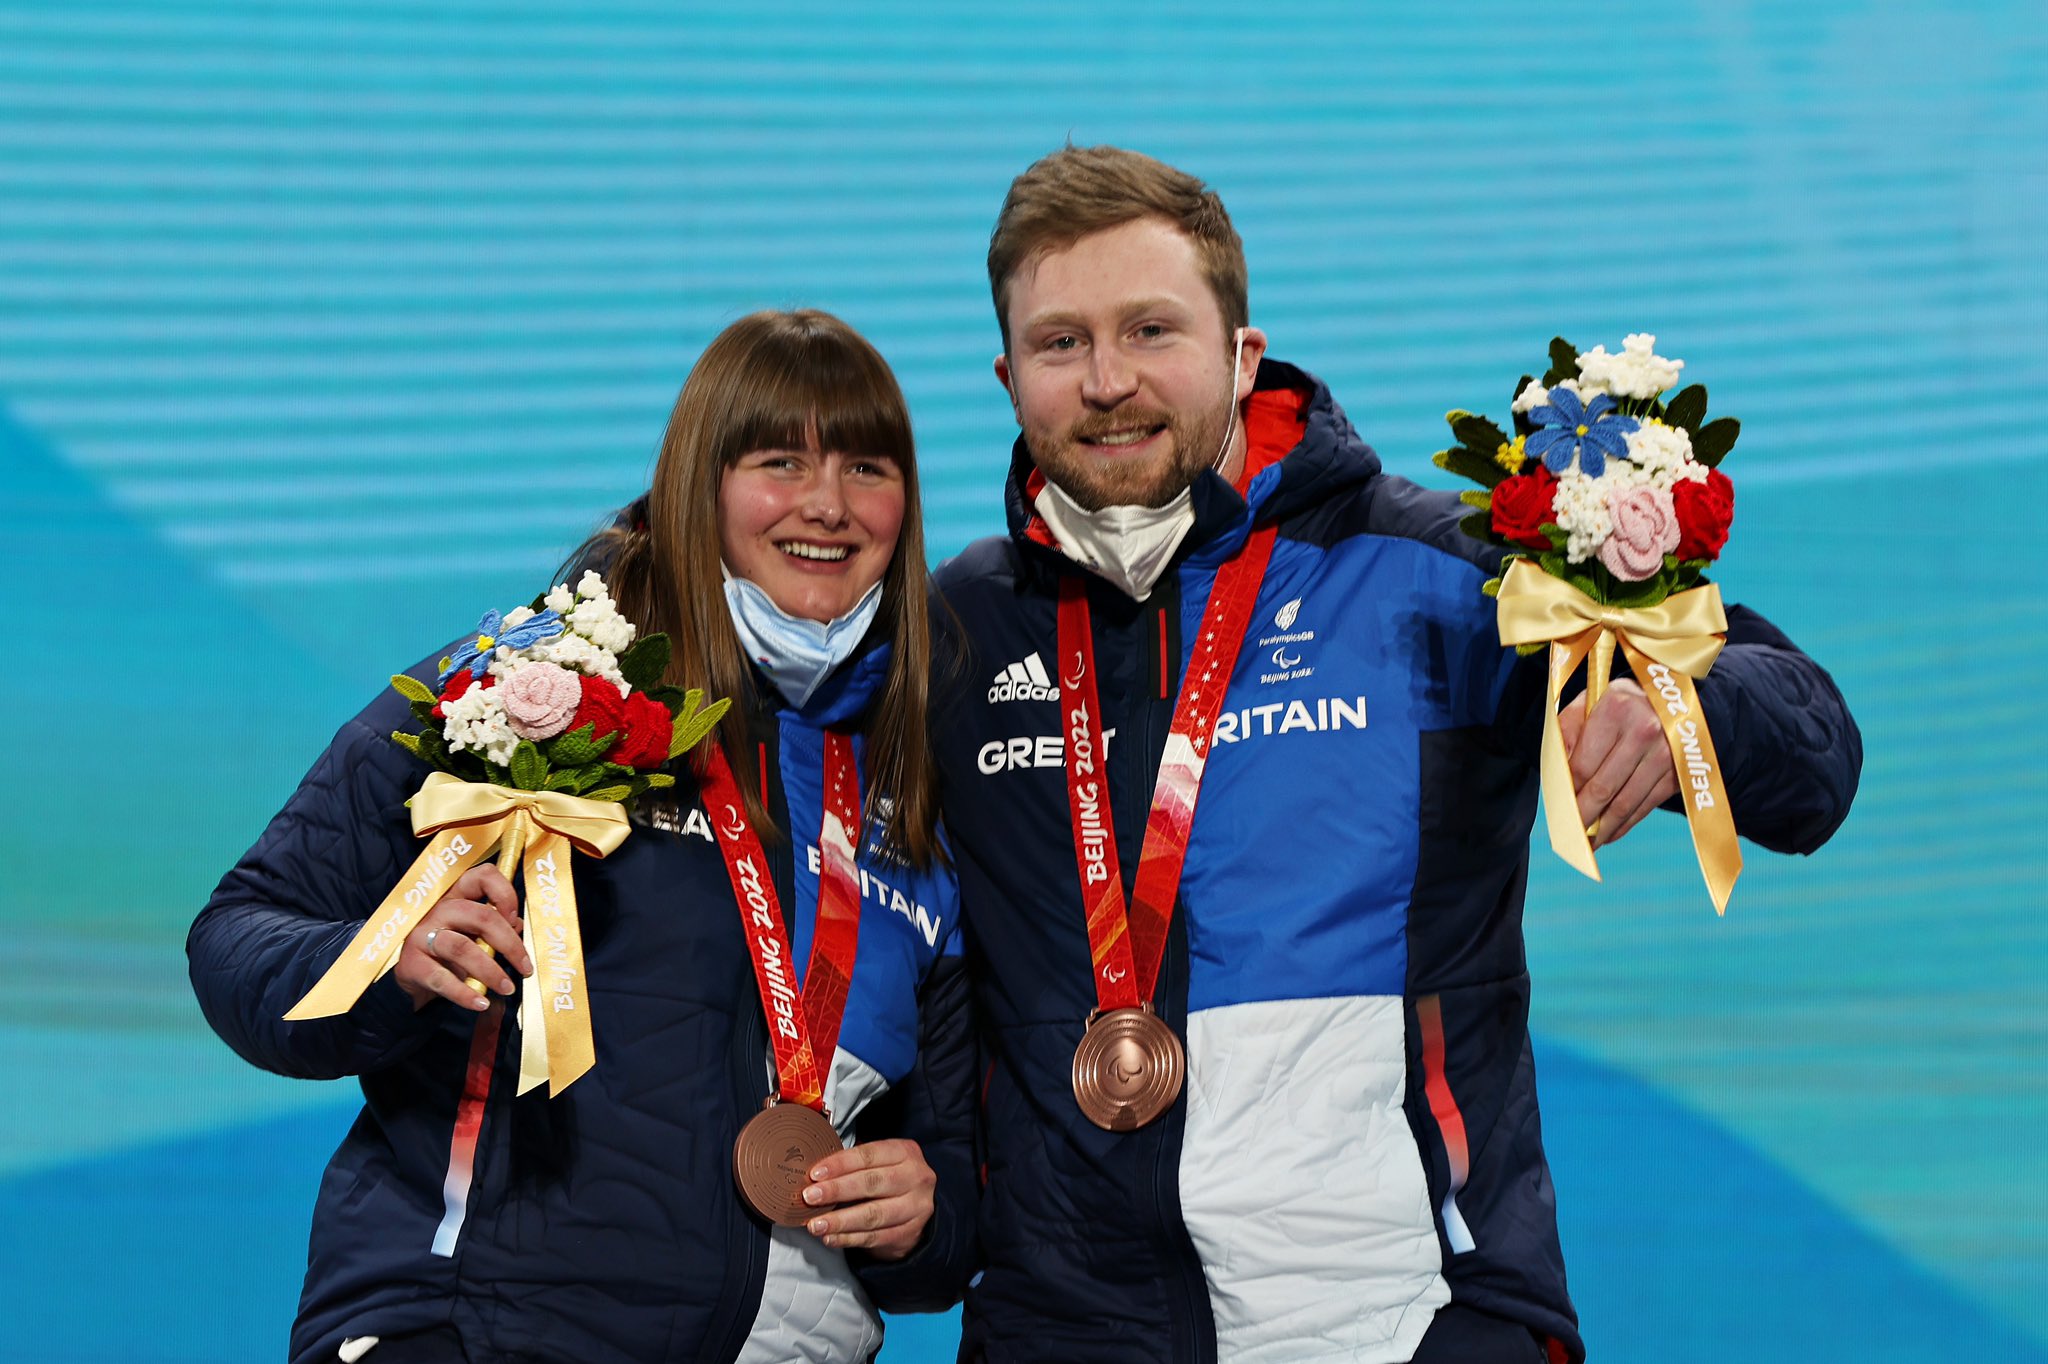 Congratulations to Get Kids Going! Para Athlete Millie Knight on receiving GB’s first medal in Winter Paralympics 2022